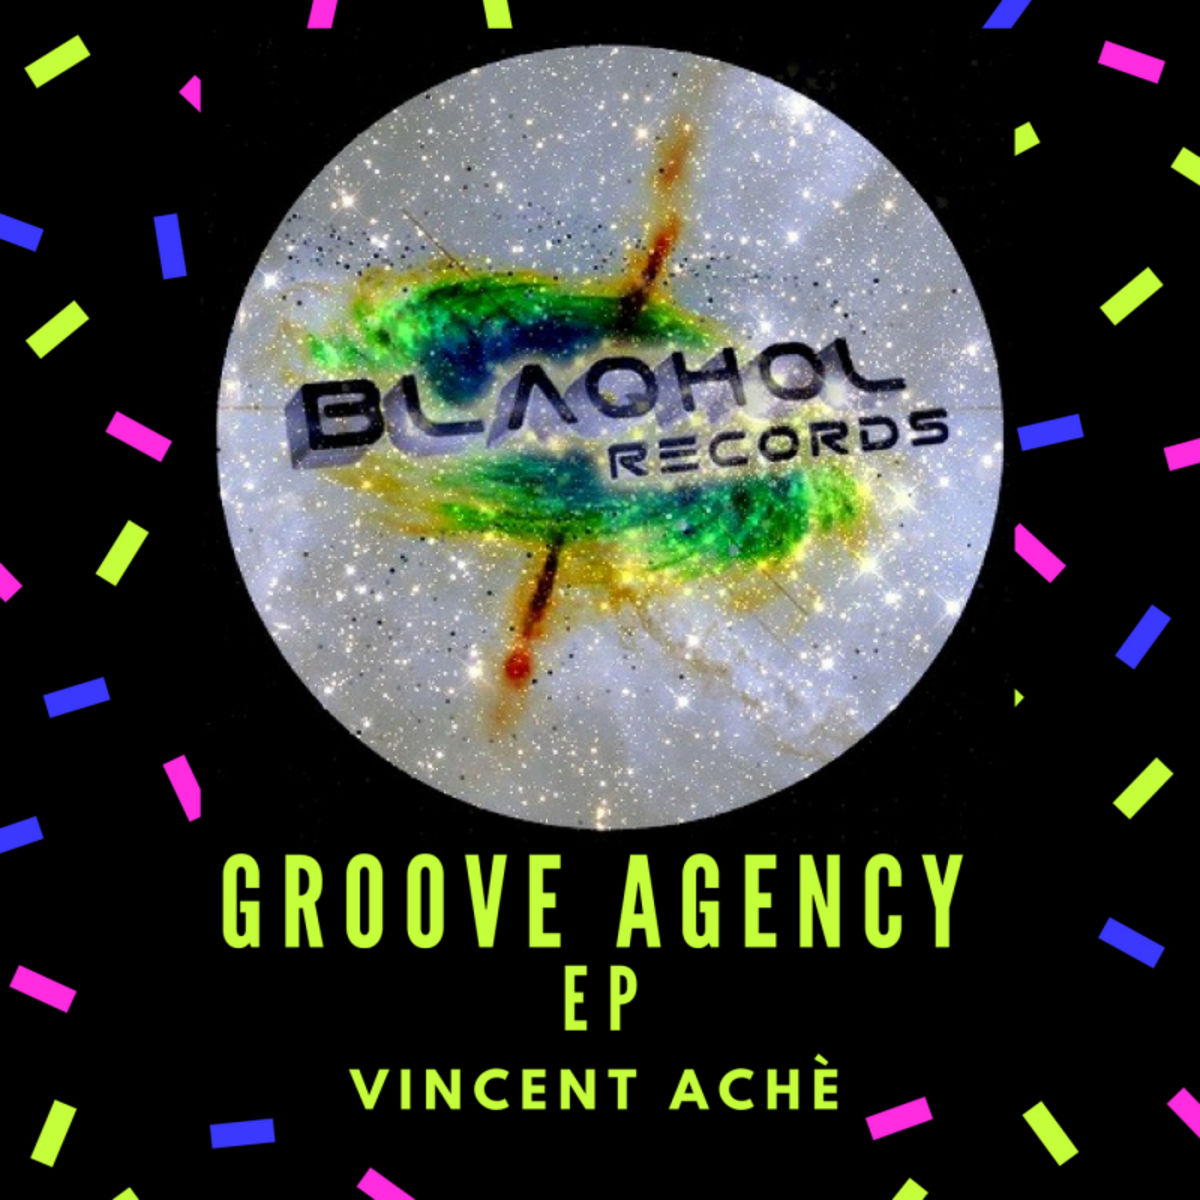 Vincent Ache - Groove Agency(EP) / Blaqhol Records